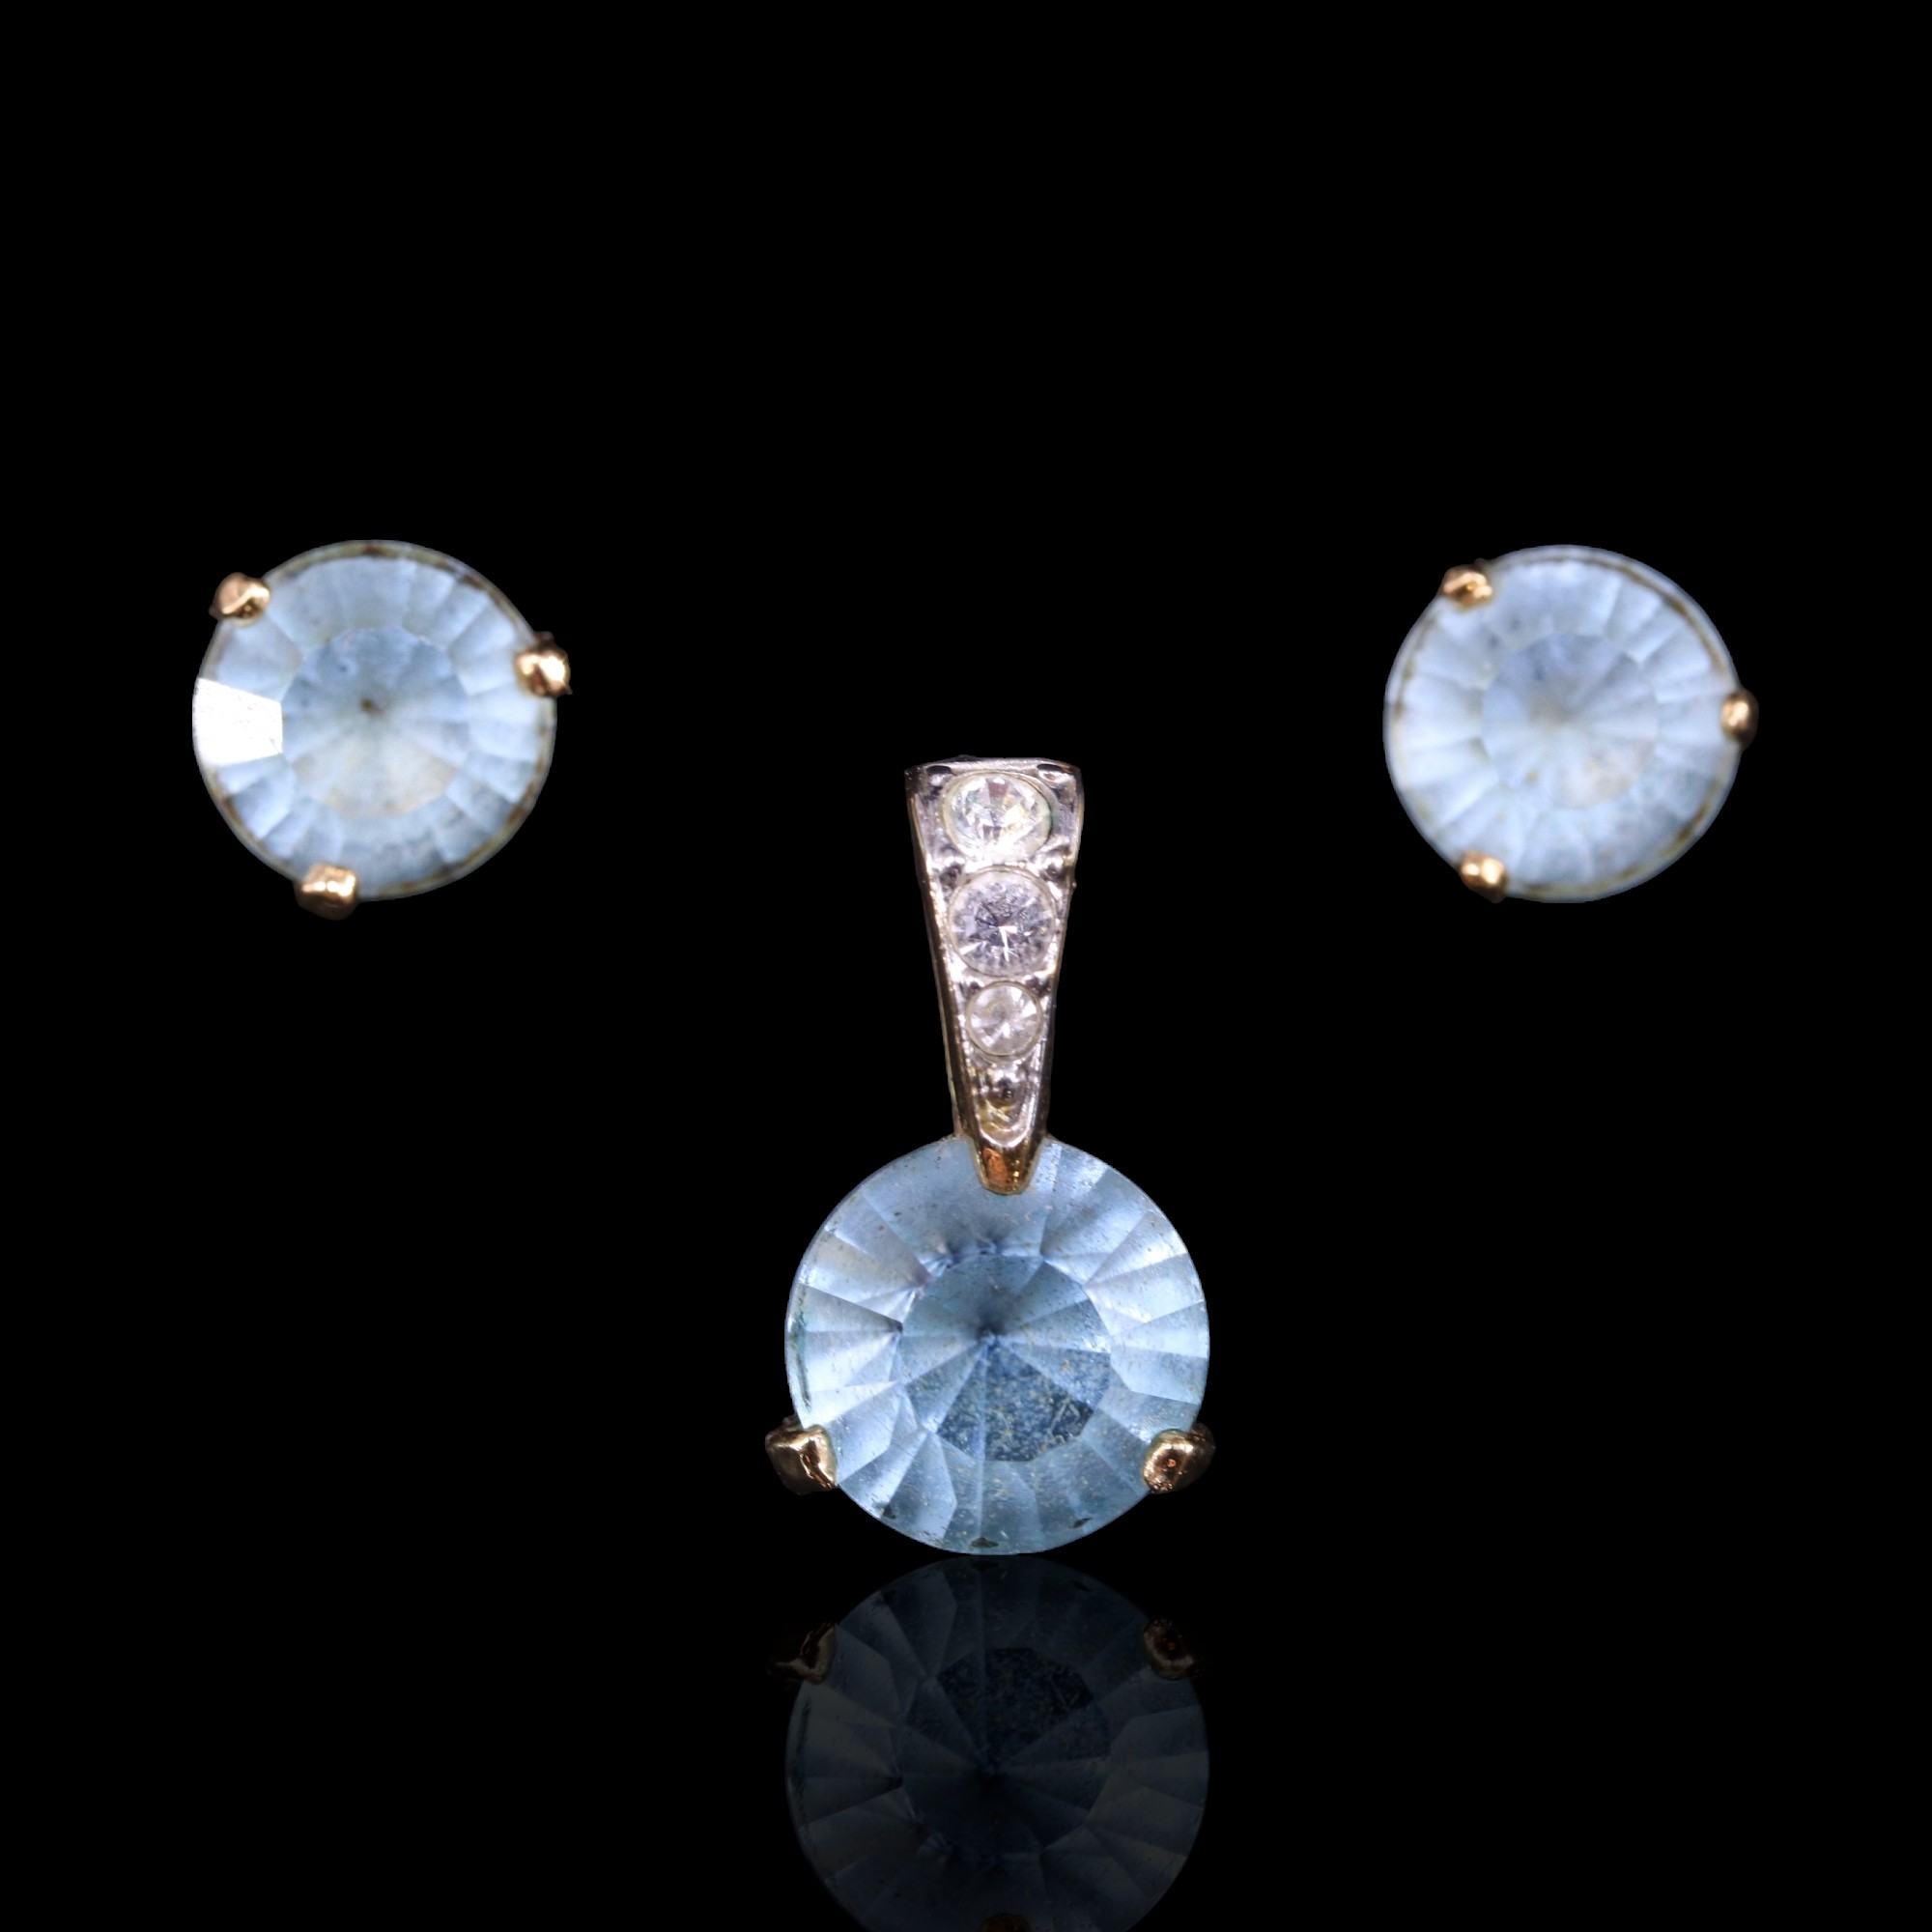 A Swarovski blue crystal pendant together with a pair of similar stud earrings